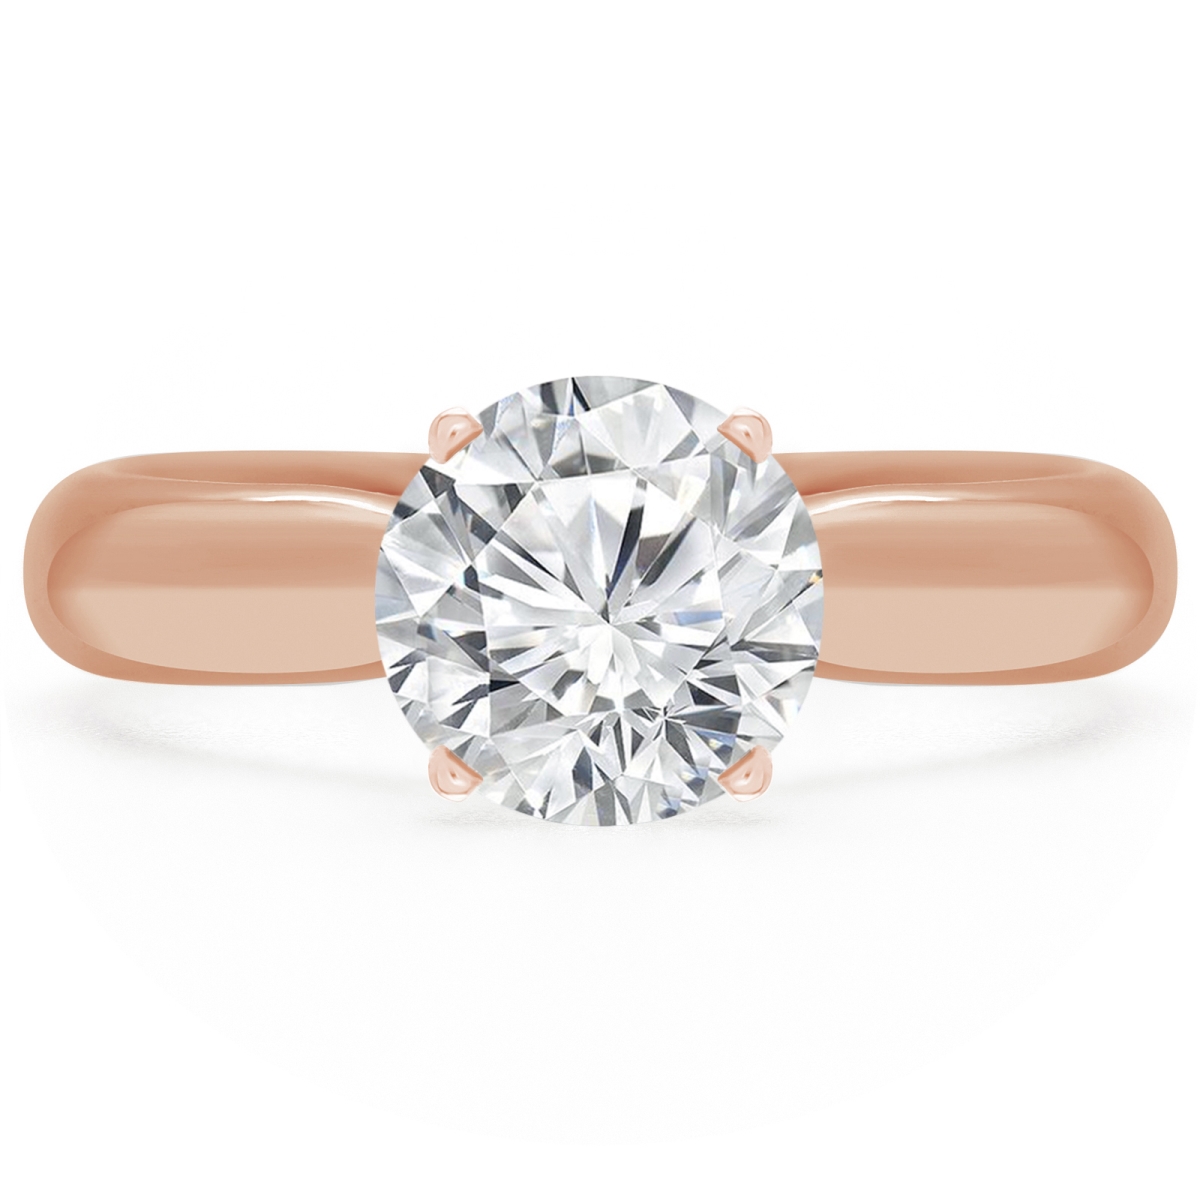 MD190548-8 0.5 CT Round Diamond Solitaire Engagement Ring in 14K Rose Gold - Size 8